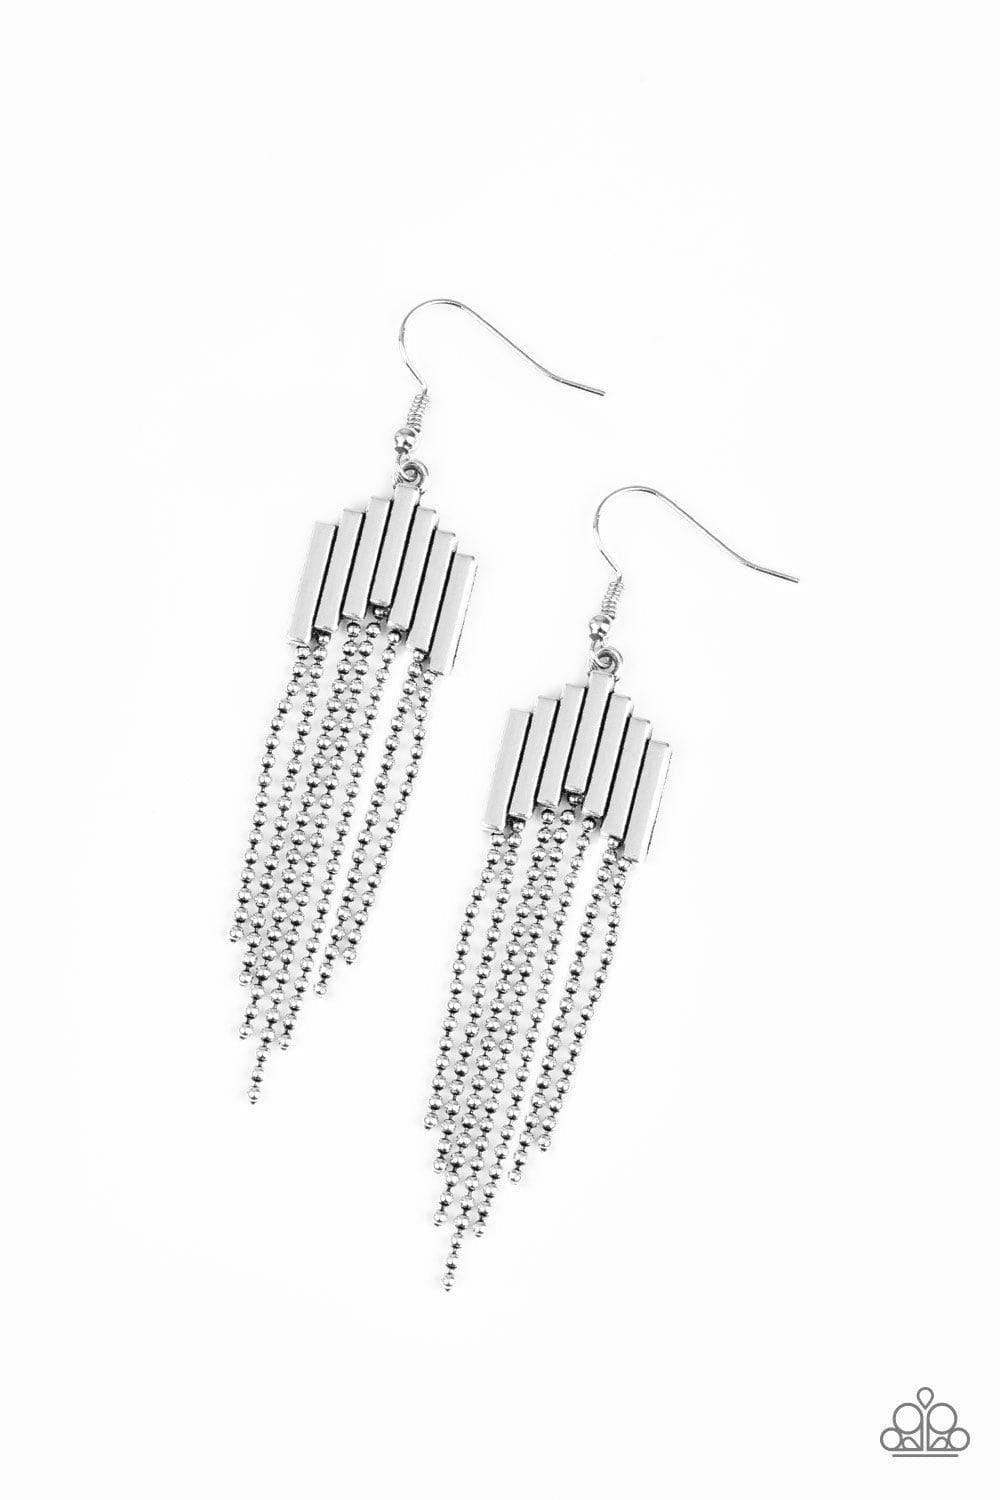 Paparazzi Accessories - Radically Retro - Silver Earrings - Bling by JessieK